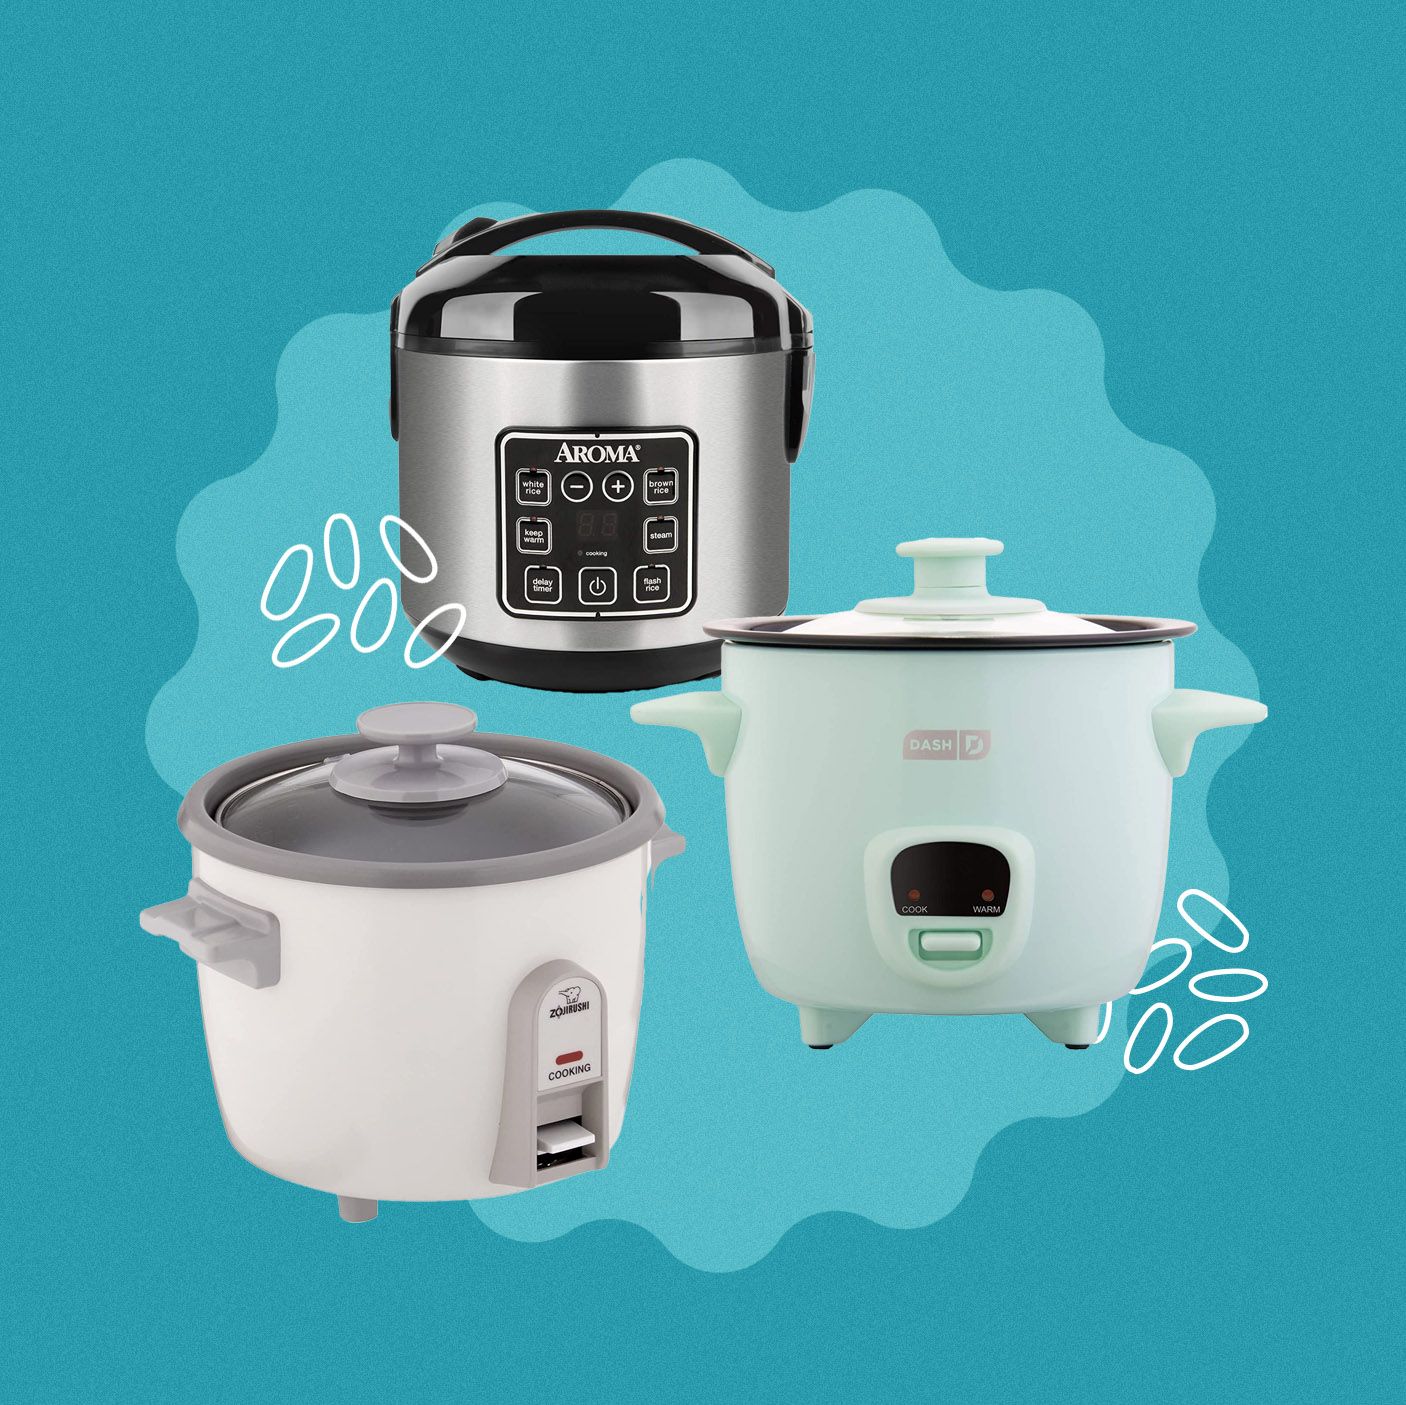 Cook Perfect Rice With These Fool-Proof Small Rice Cookers